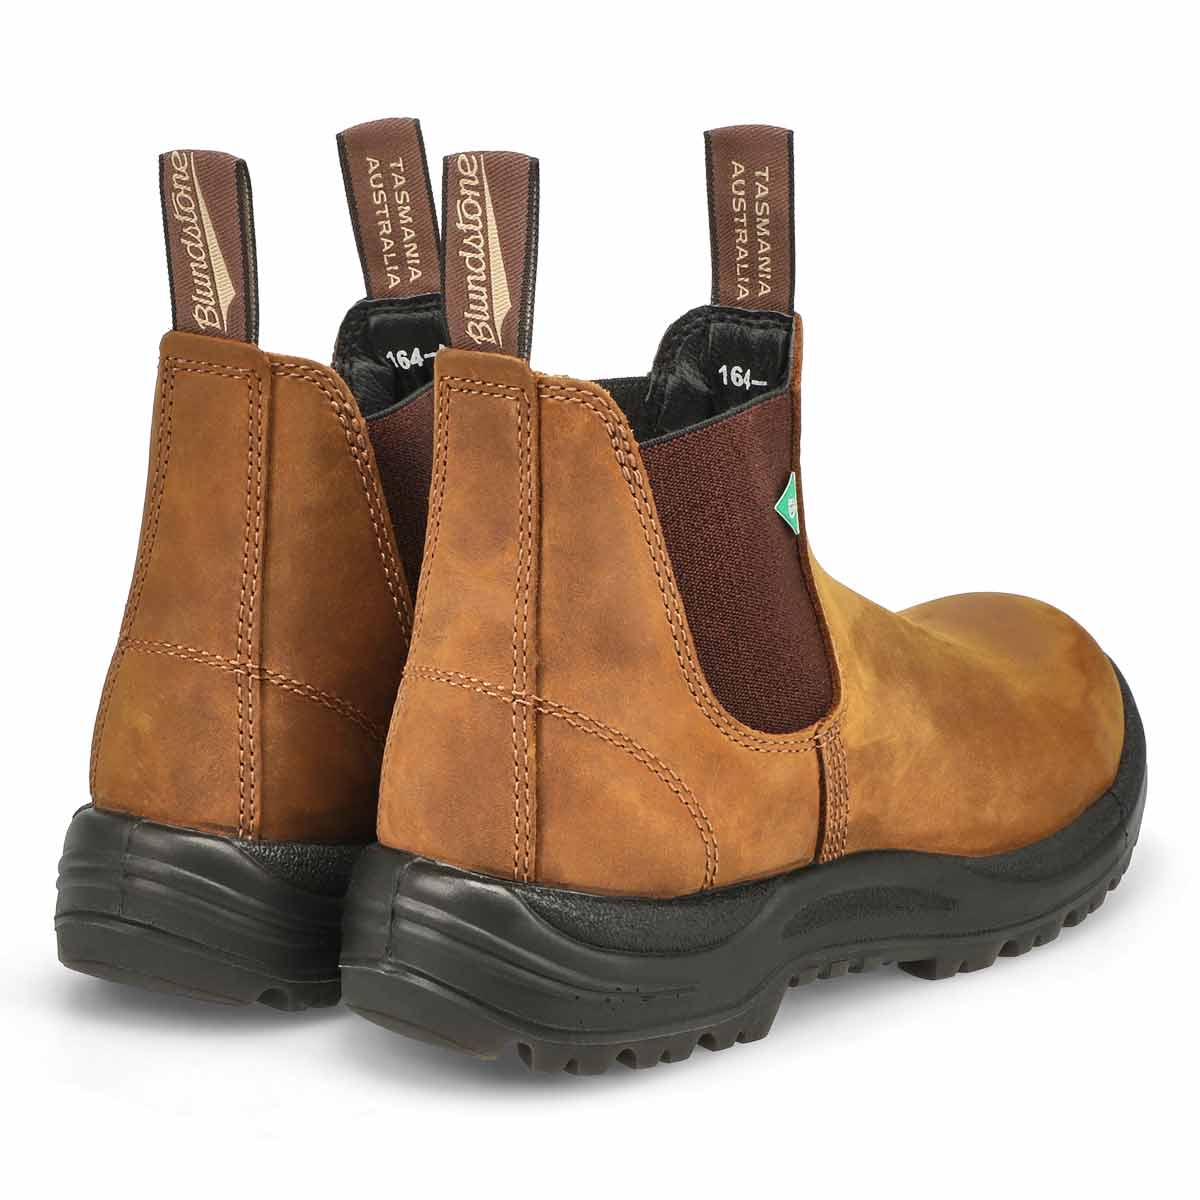 Blundstone Unisex 169 - Work & Safety Boot To | SoftMoc.com